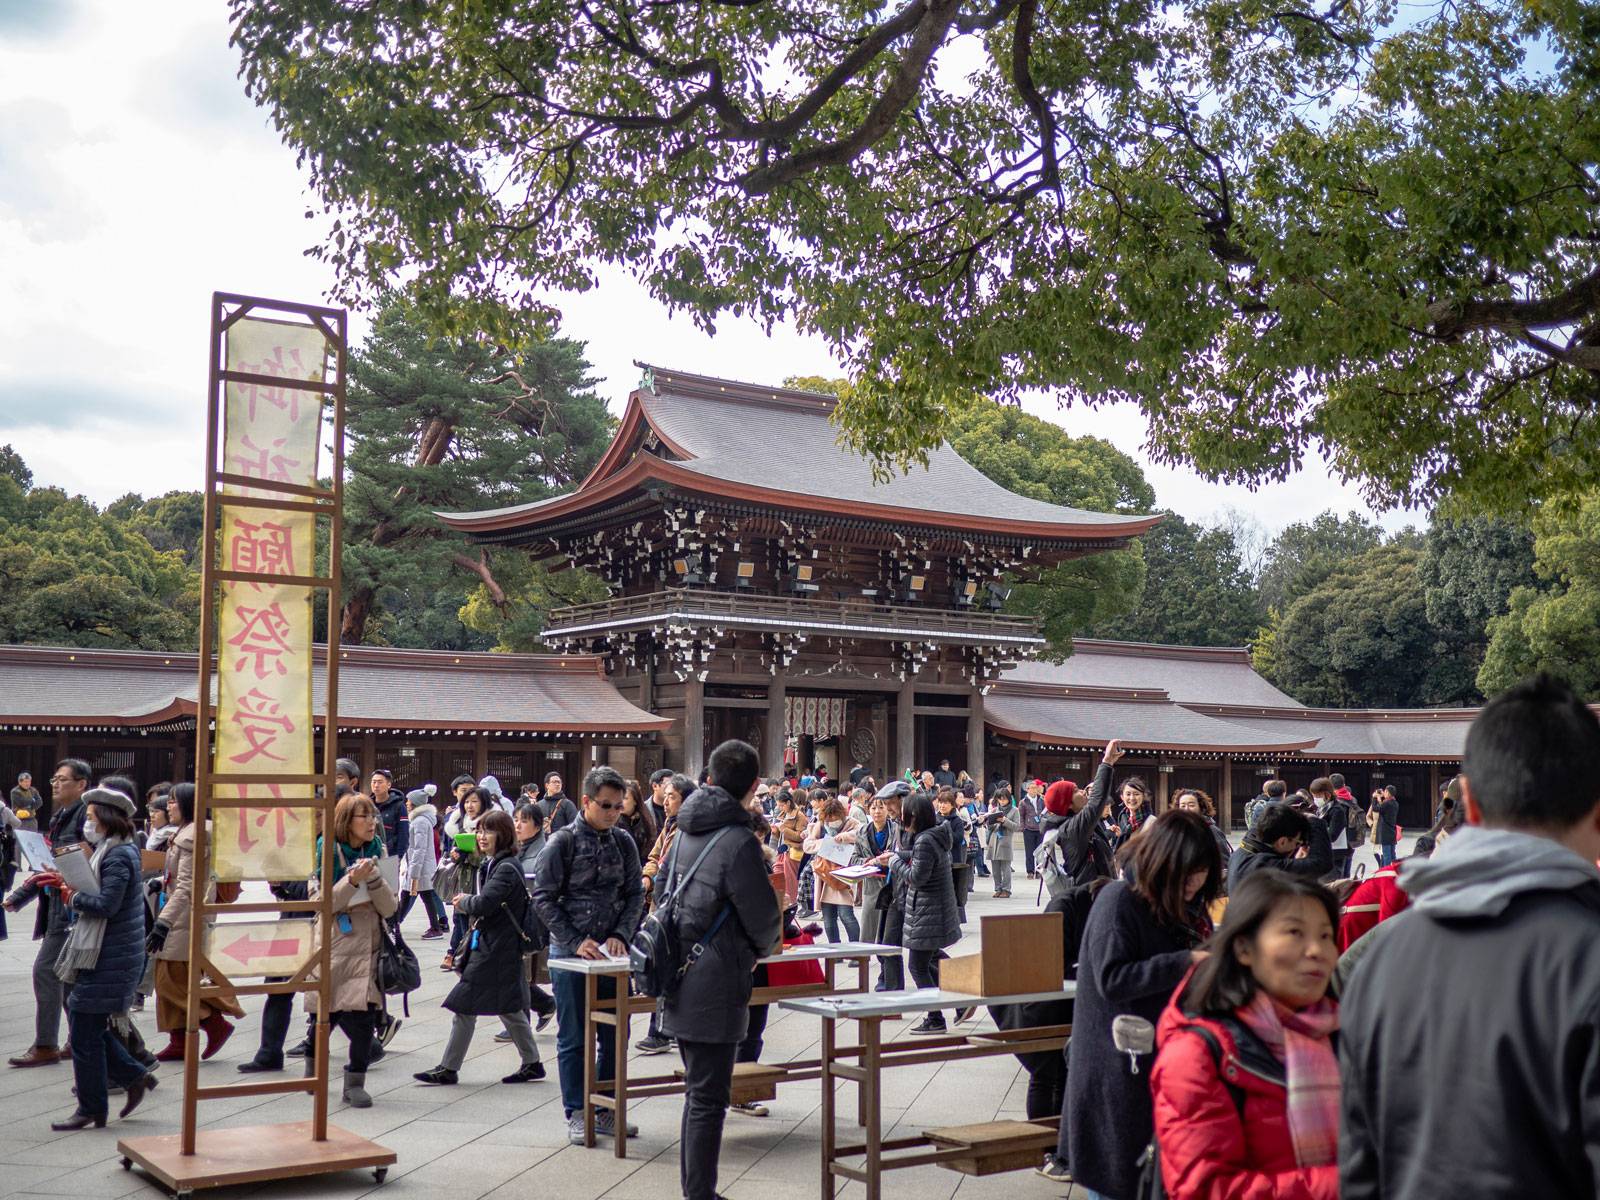 Main shrine busy with visitors